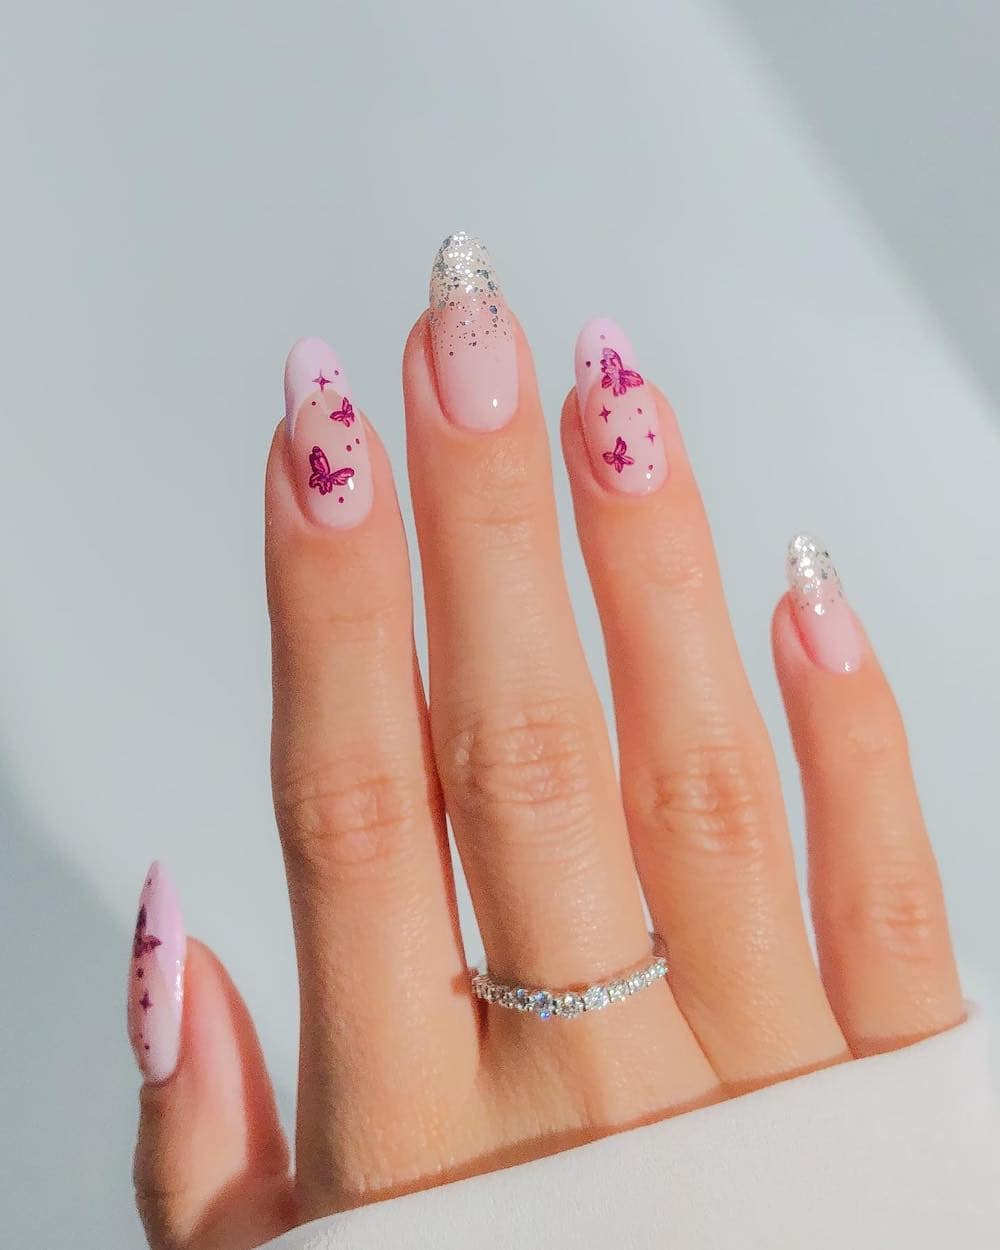 A hand with long almond nails painted in pink French tips and ombre silver glitter tips with pink butterflies